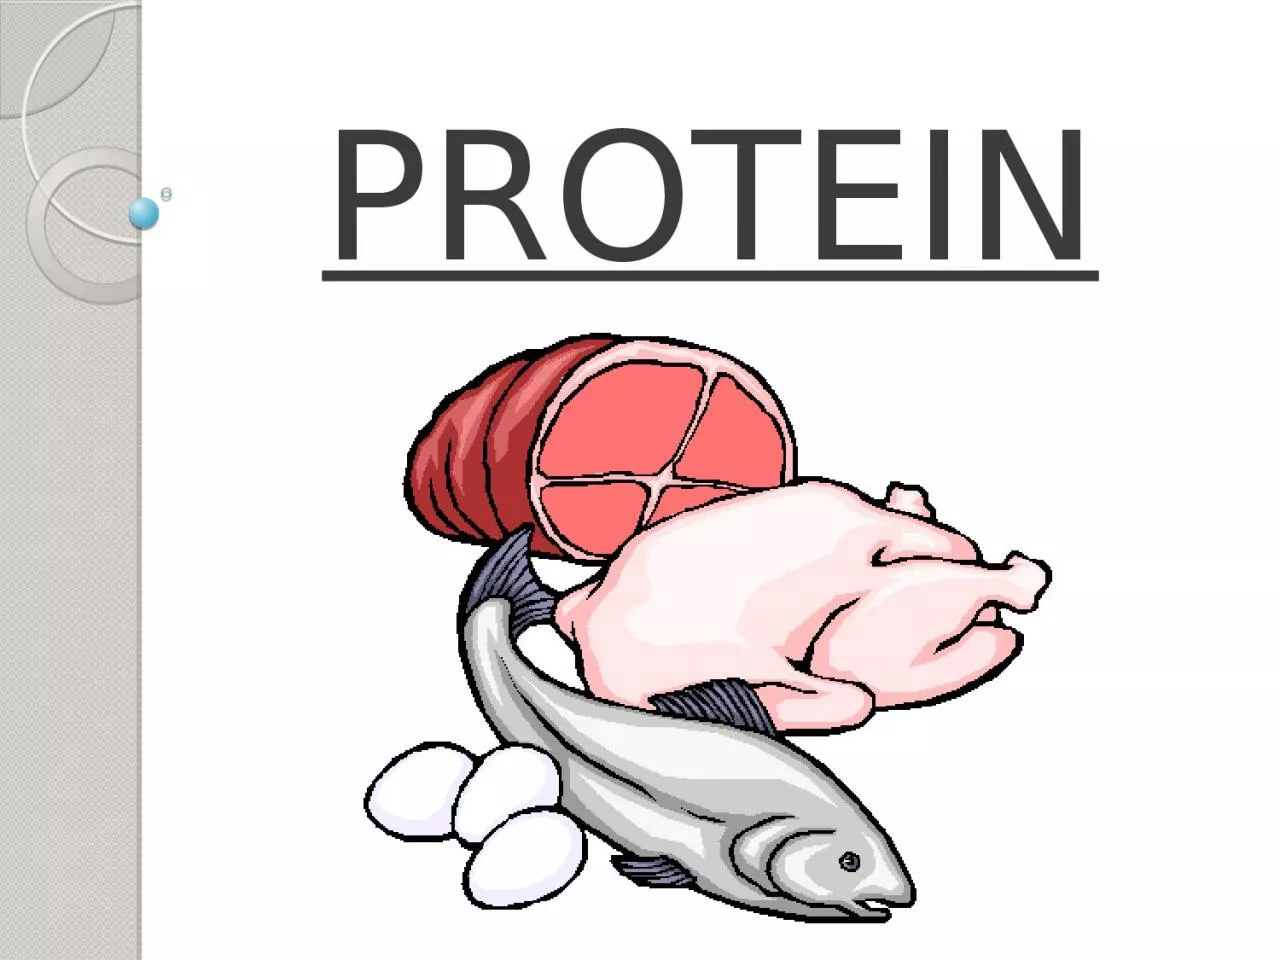 PROTEIN Classification of Nutrients